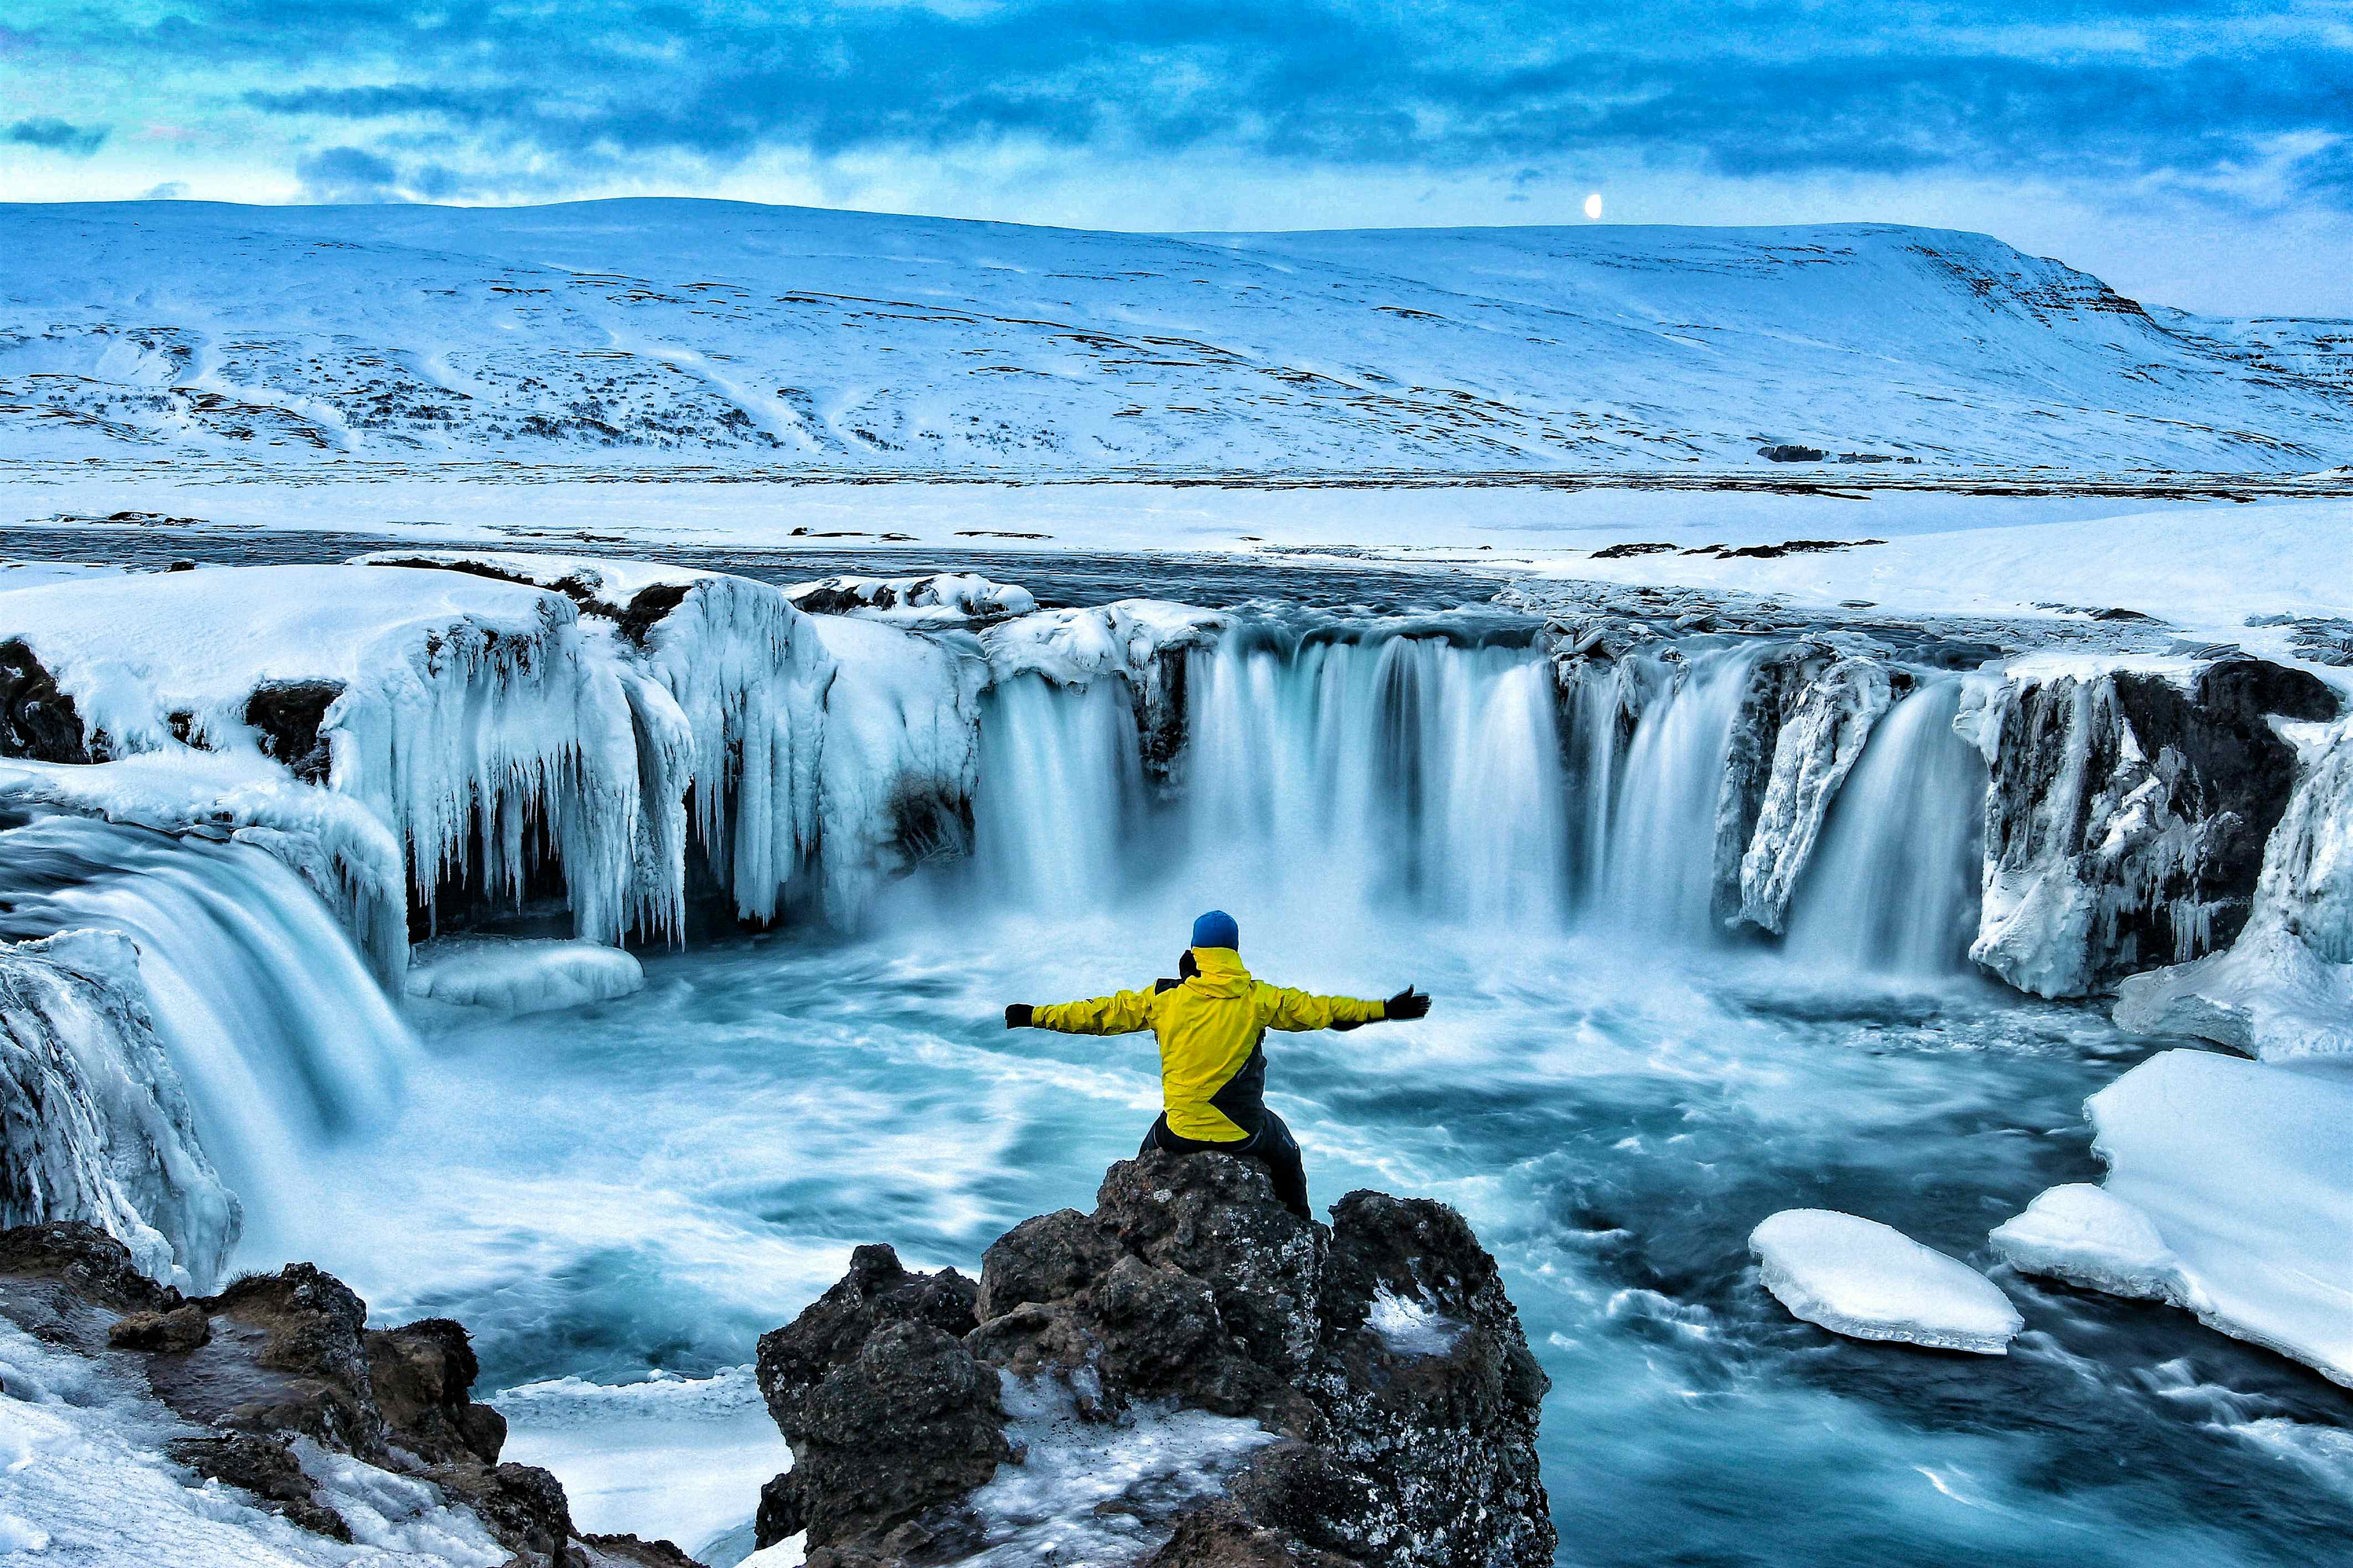 Discovering Iceland: A Land of Fire and Ice